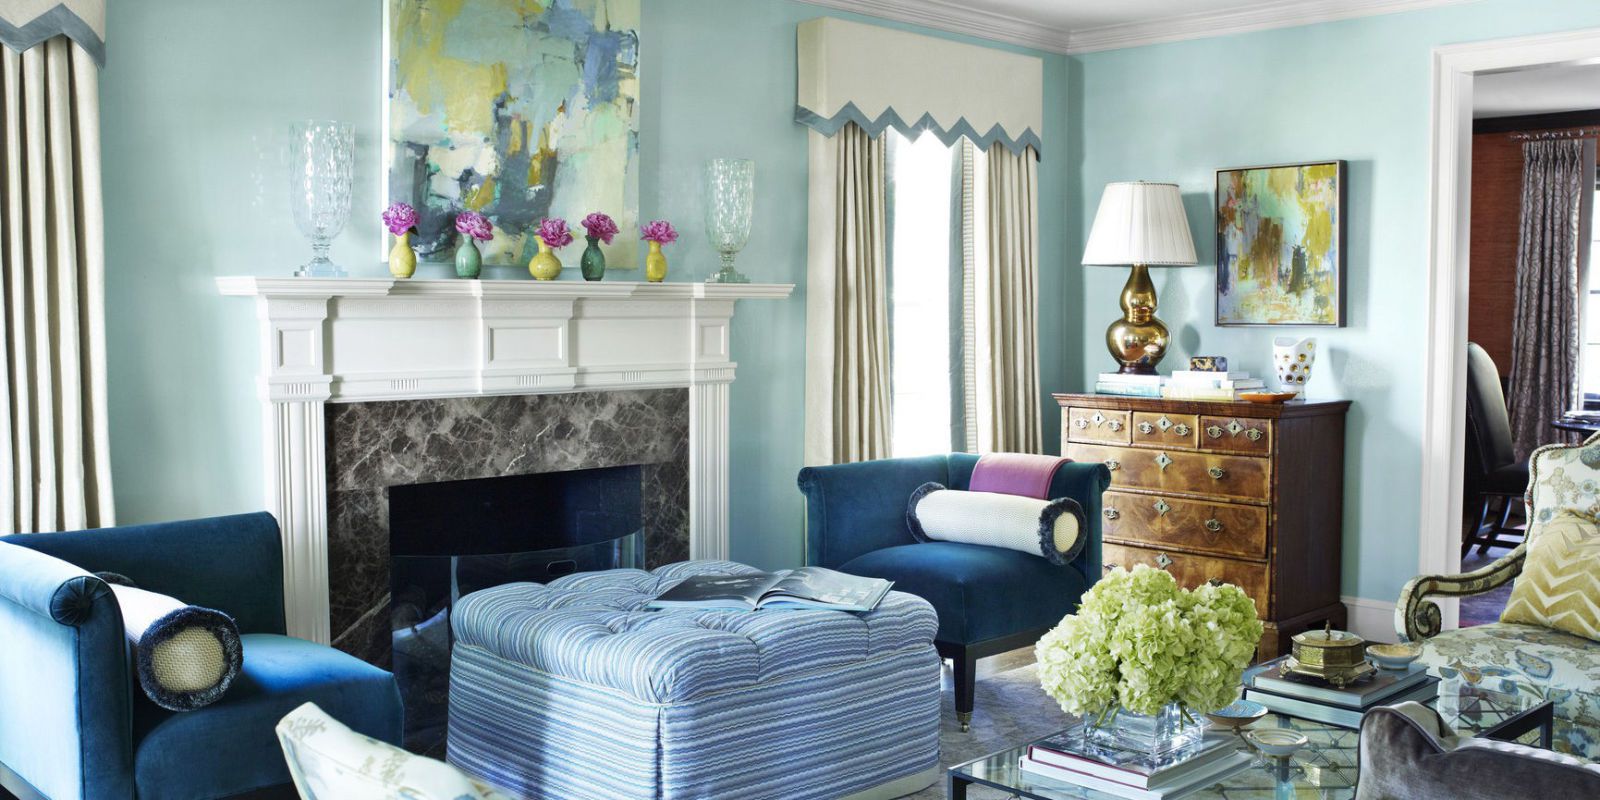 paint ideas for living room the heavenly airiness of the walls painted in benjamin mooreu0027s antiguan sky LXCBRZI